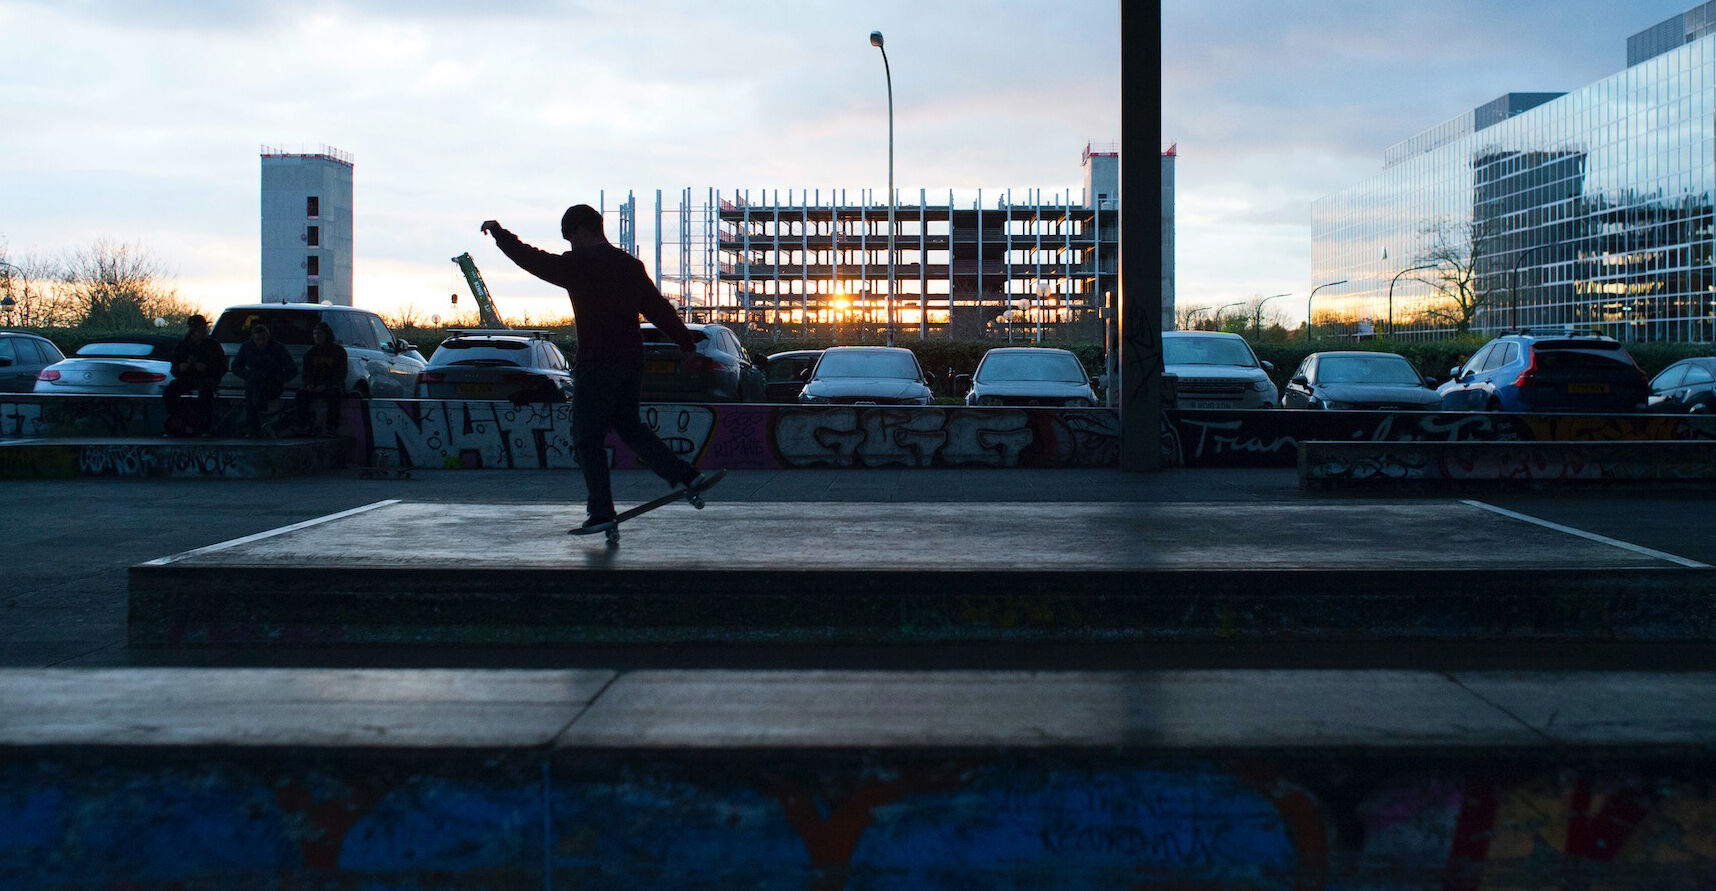 Image of Alex (skateboarder) silhouette at sunset in the city